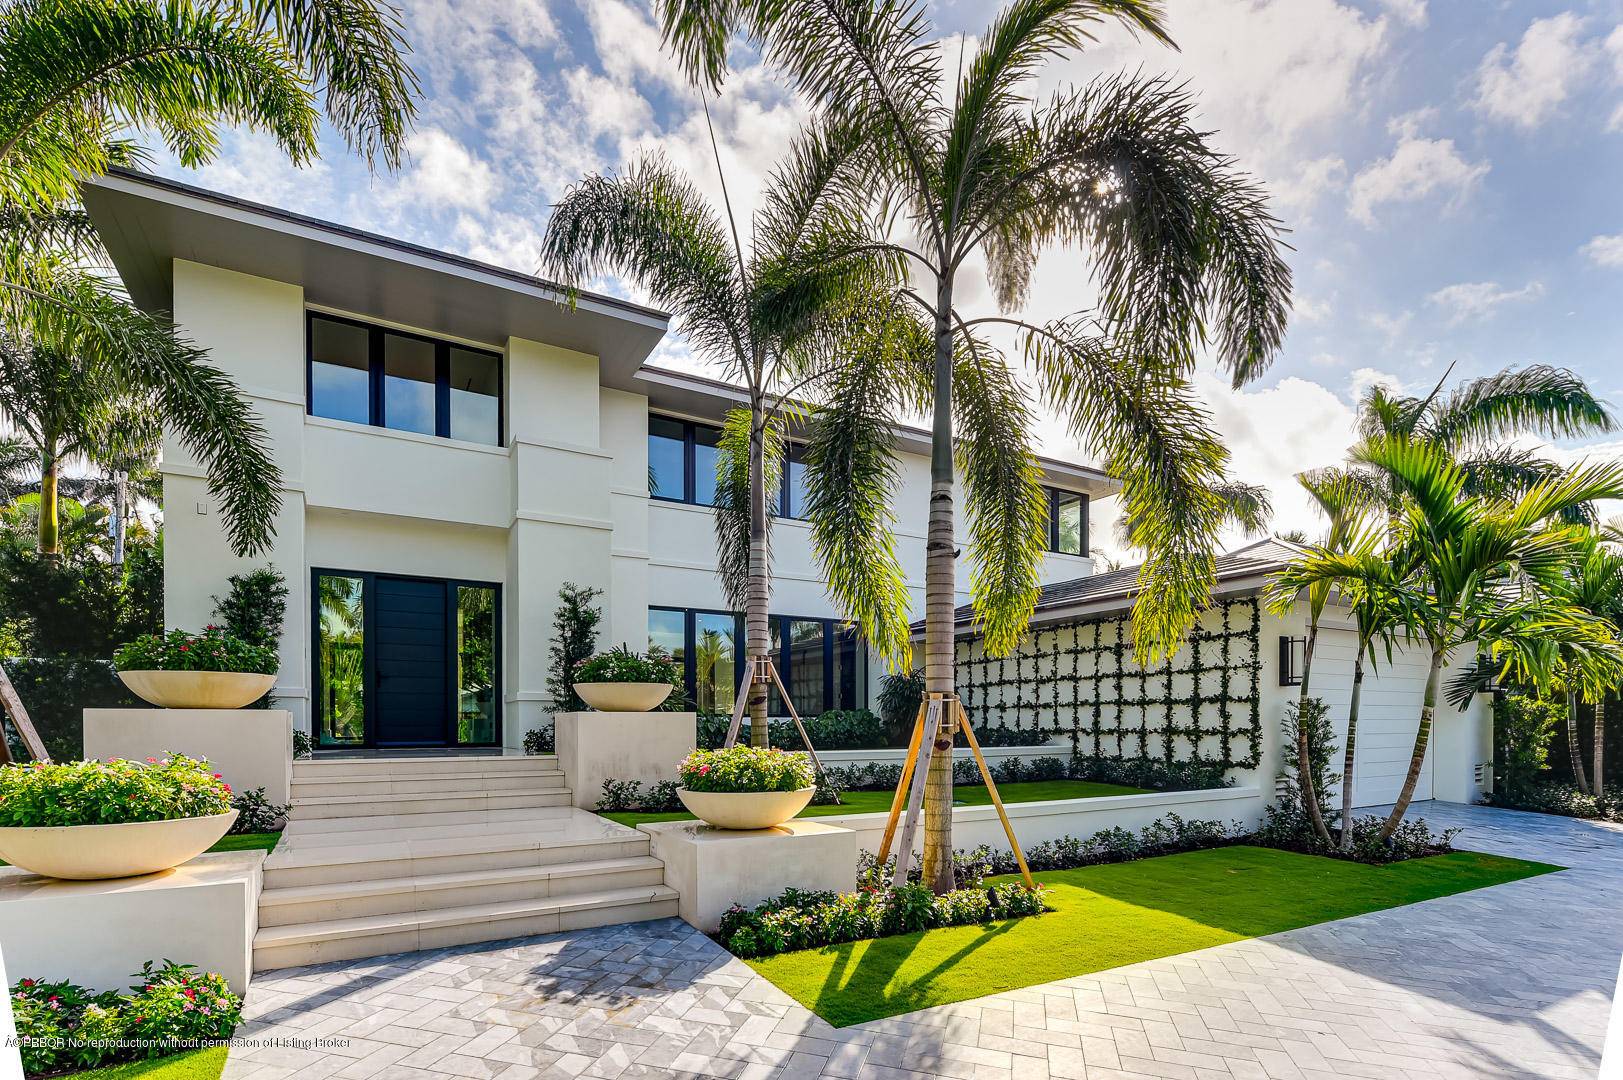 Chic and Sophisticated new contemporary home close to town.